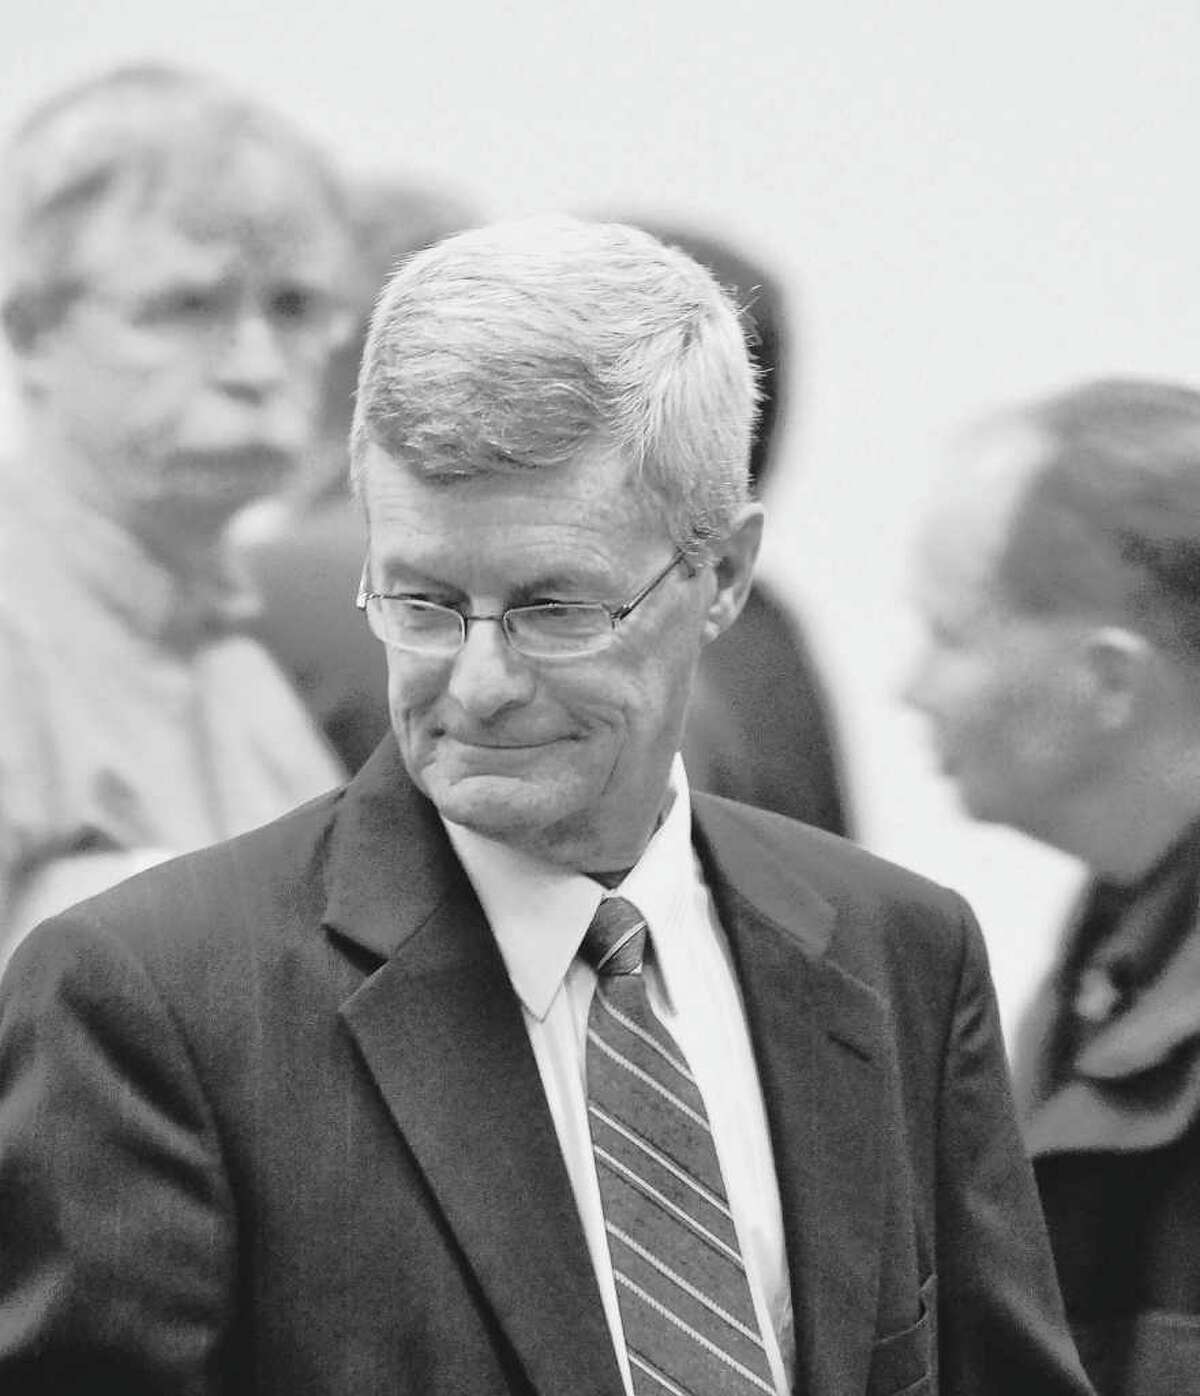 Gary Mercure, a Catholic priest from the Albany Roman Catholic Diocese, stands trial in Berkshre County Massachusetts on charges of raping and molesting two former altar boys in the 1980s. (AP Photo/The Berkshire Eagle, Ben Garver)